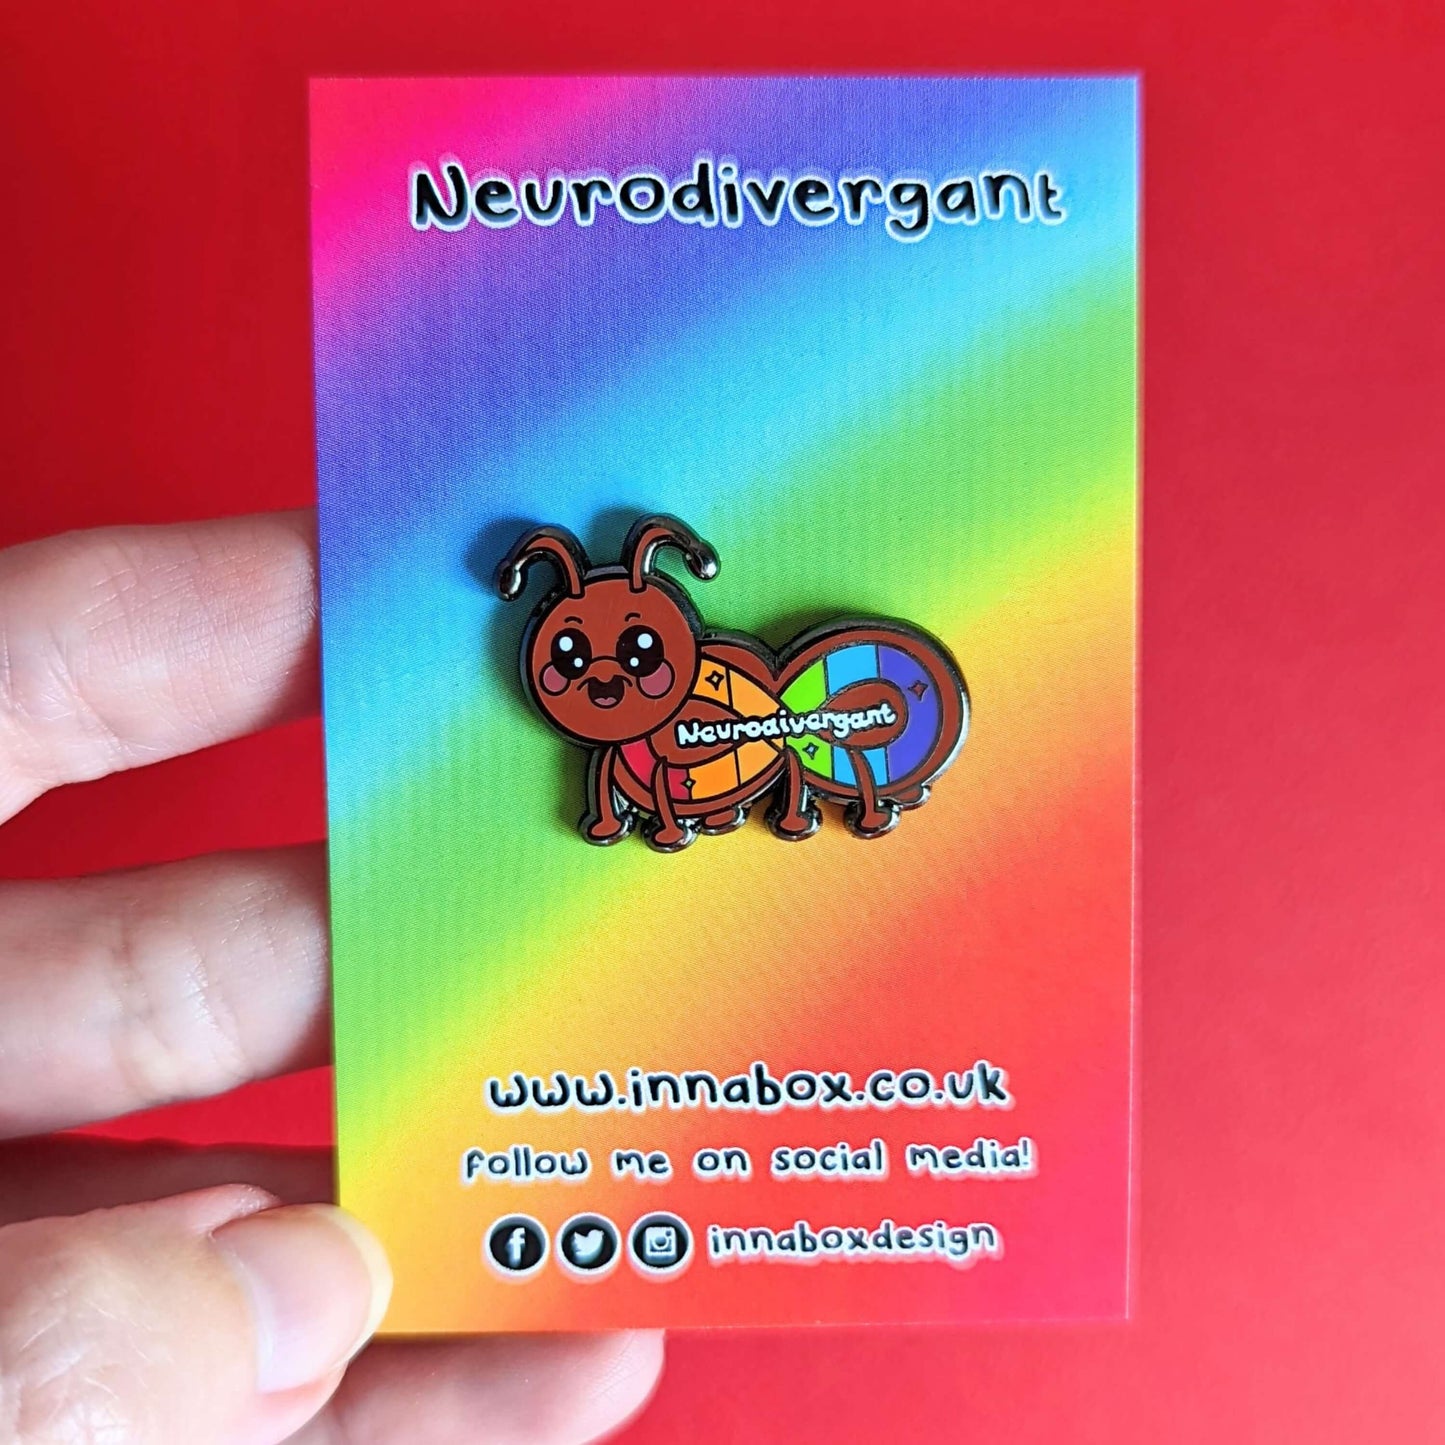 The Neurodivergant Ant Enamel Pin - Neurodivergent on rainbow backing card with innabox social media handles along the bottom held over a red background. The brown ant shape enamel pin is smiling with a rainbow infinity symbol and white text reading 'neurodivergant' with sparkles across its body. The hand drawn design is raising awareness for neurodiversity.